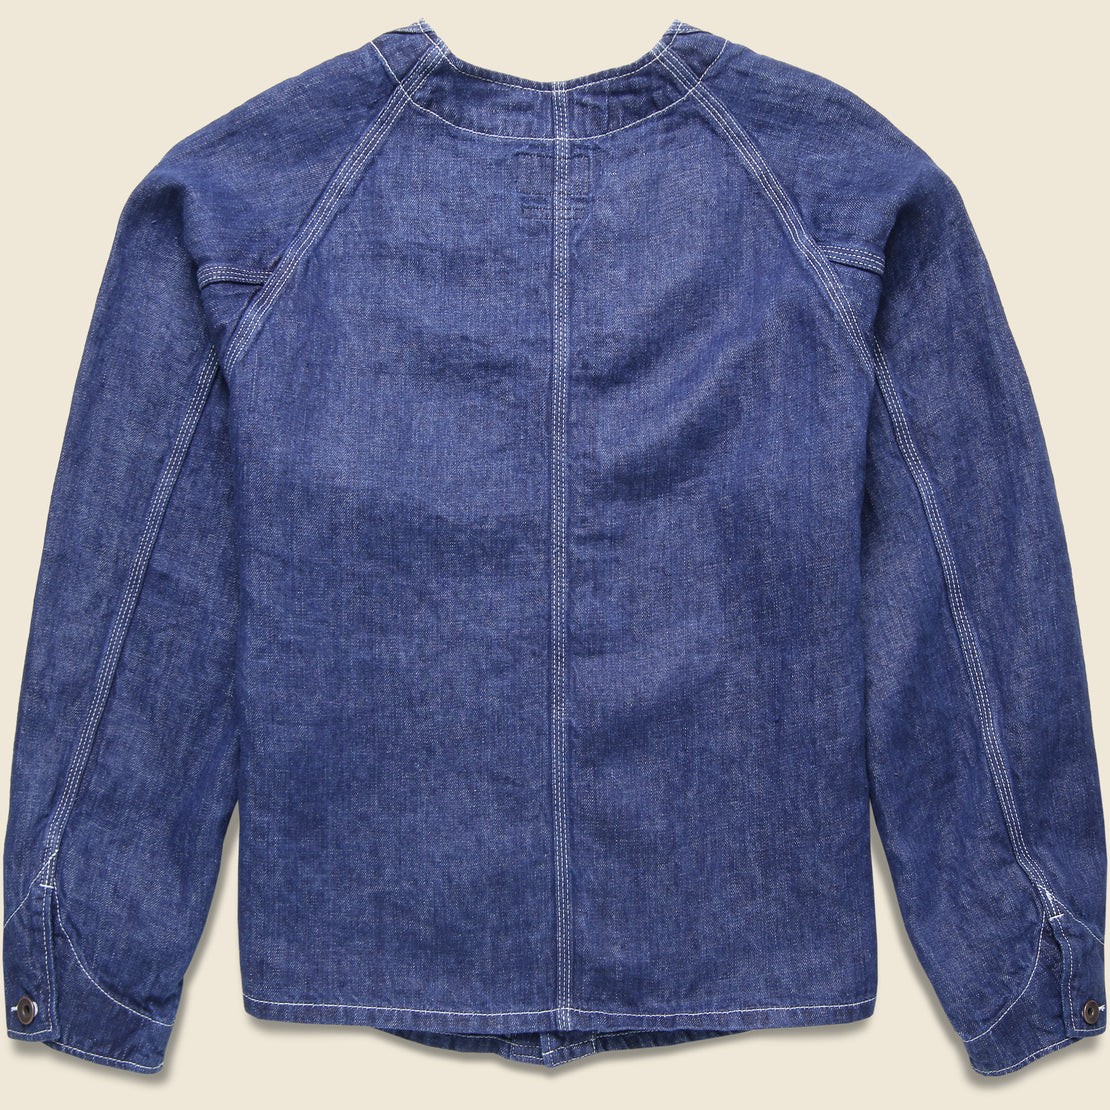 Twill Linen Engineer Jacket - Indigo - BEAMS+ - STAG Provisions - Outerwear - Coat / Jacket